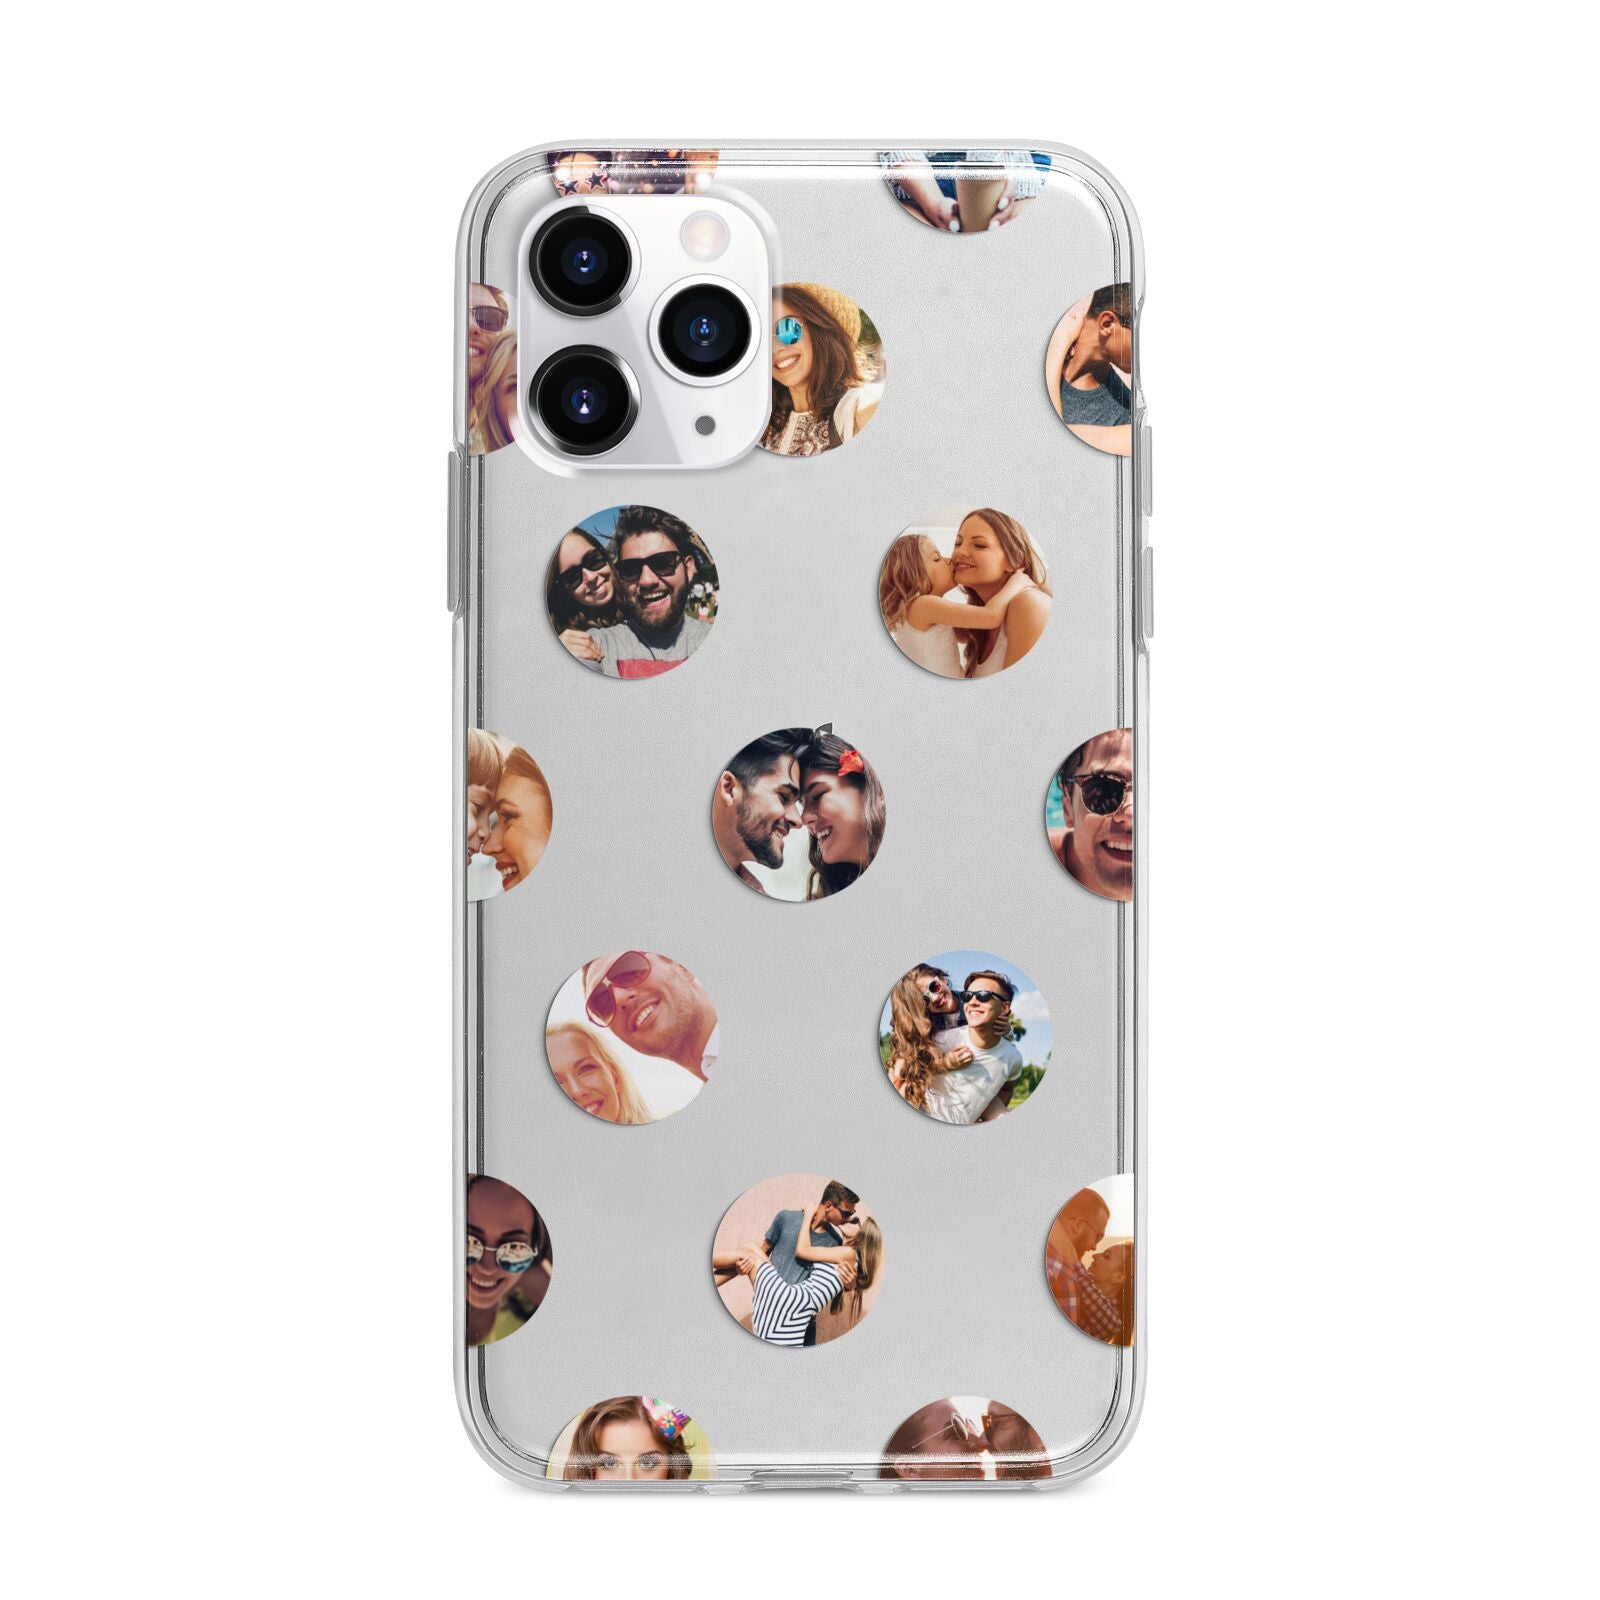 Polka Dot Photo Montage Upload Apple iPhone 11 Pro Max in Silver with Bumper Case